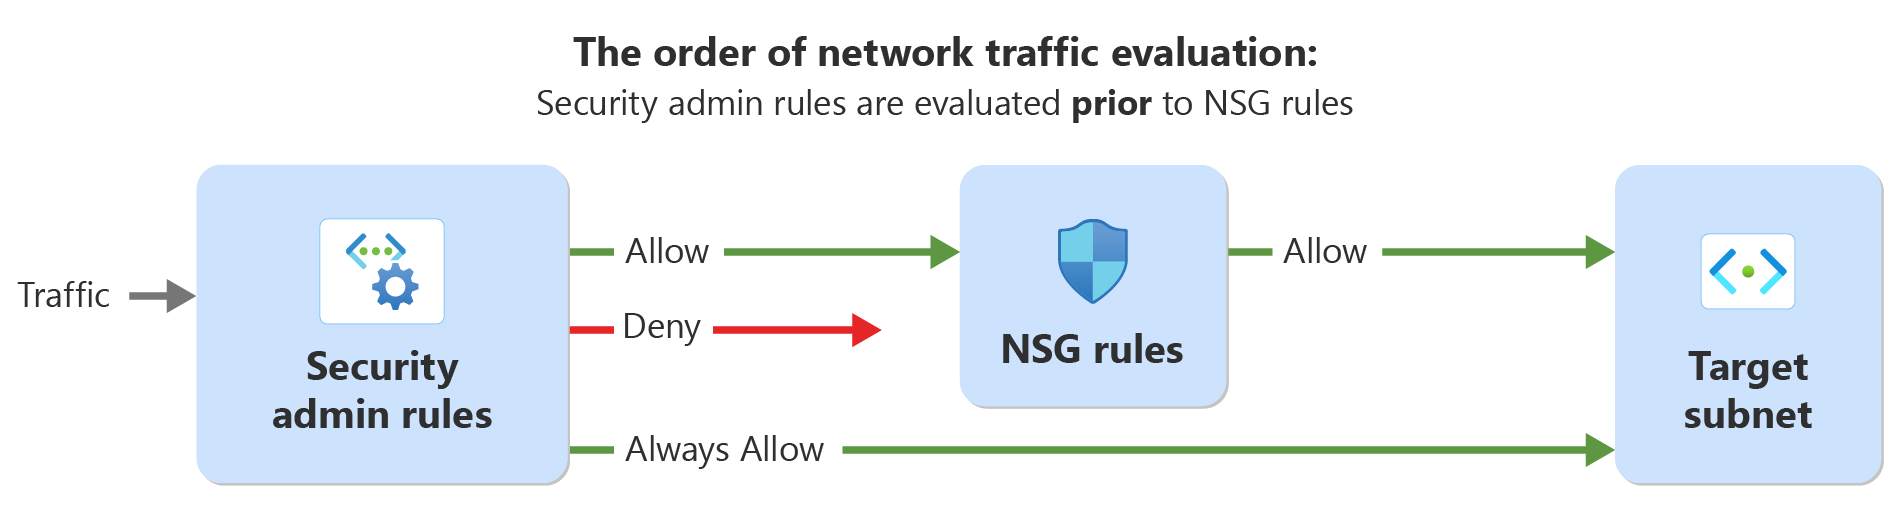 Diagram showing order of evaluation for network traffic with security admin rules and network security rules.